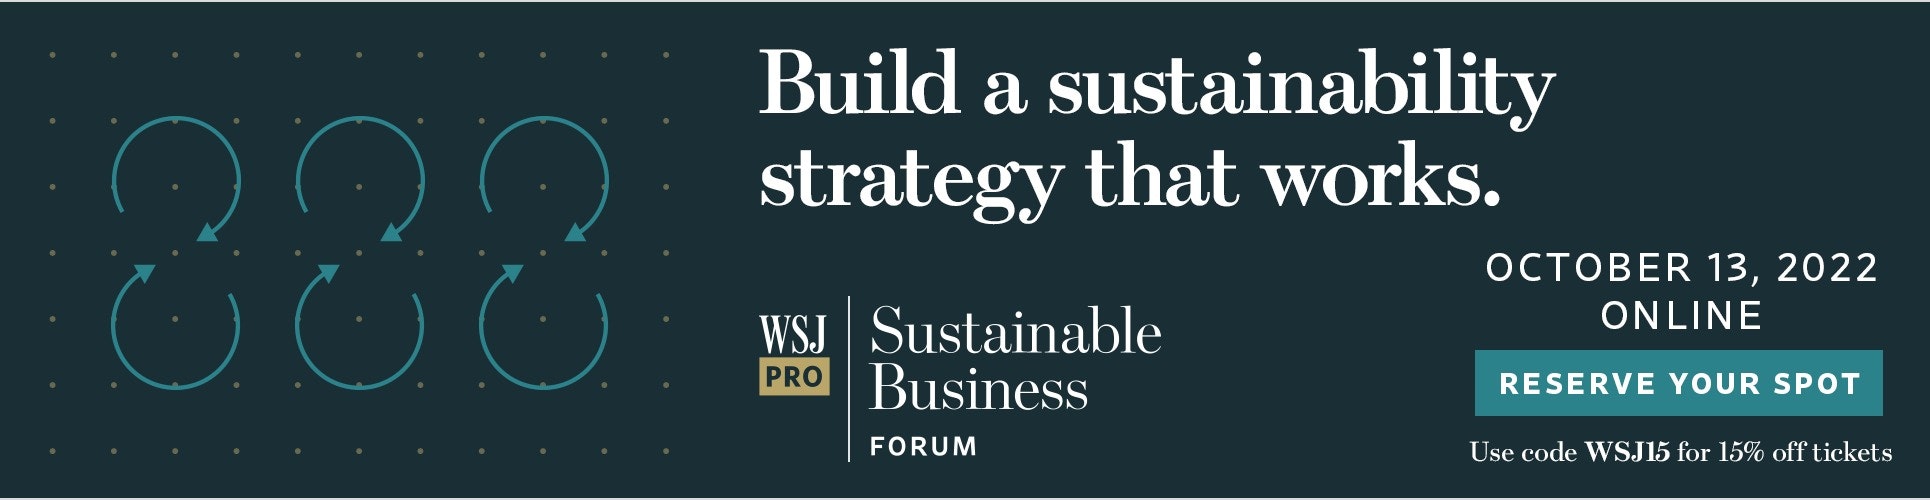 Cover image of WSJ Pro Sustainable Business Forum